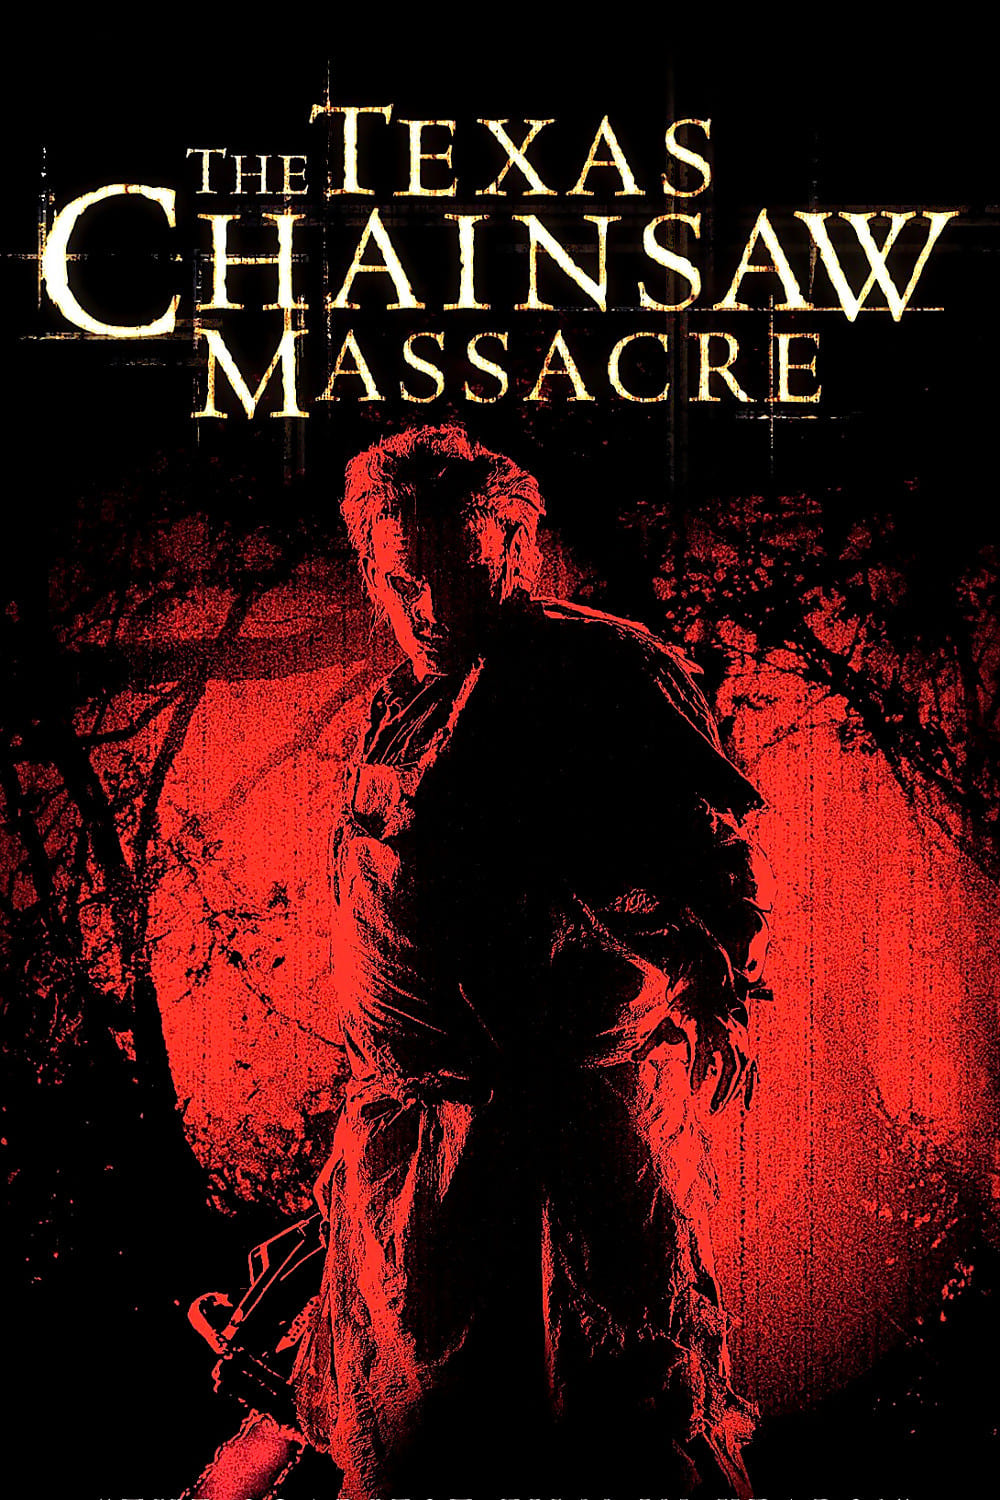 The Texas Chainsaw Massacre (2003) Movie Poster High Quality Glossy Paper A1 A2 A3 A4 A3 Framed or Unframed!!!